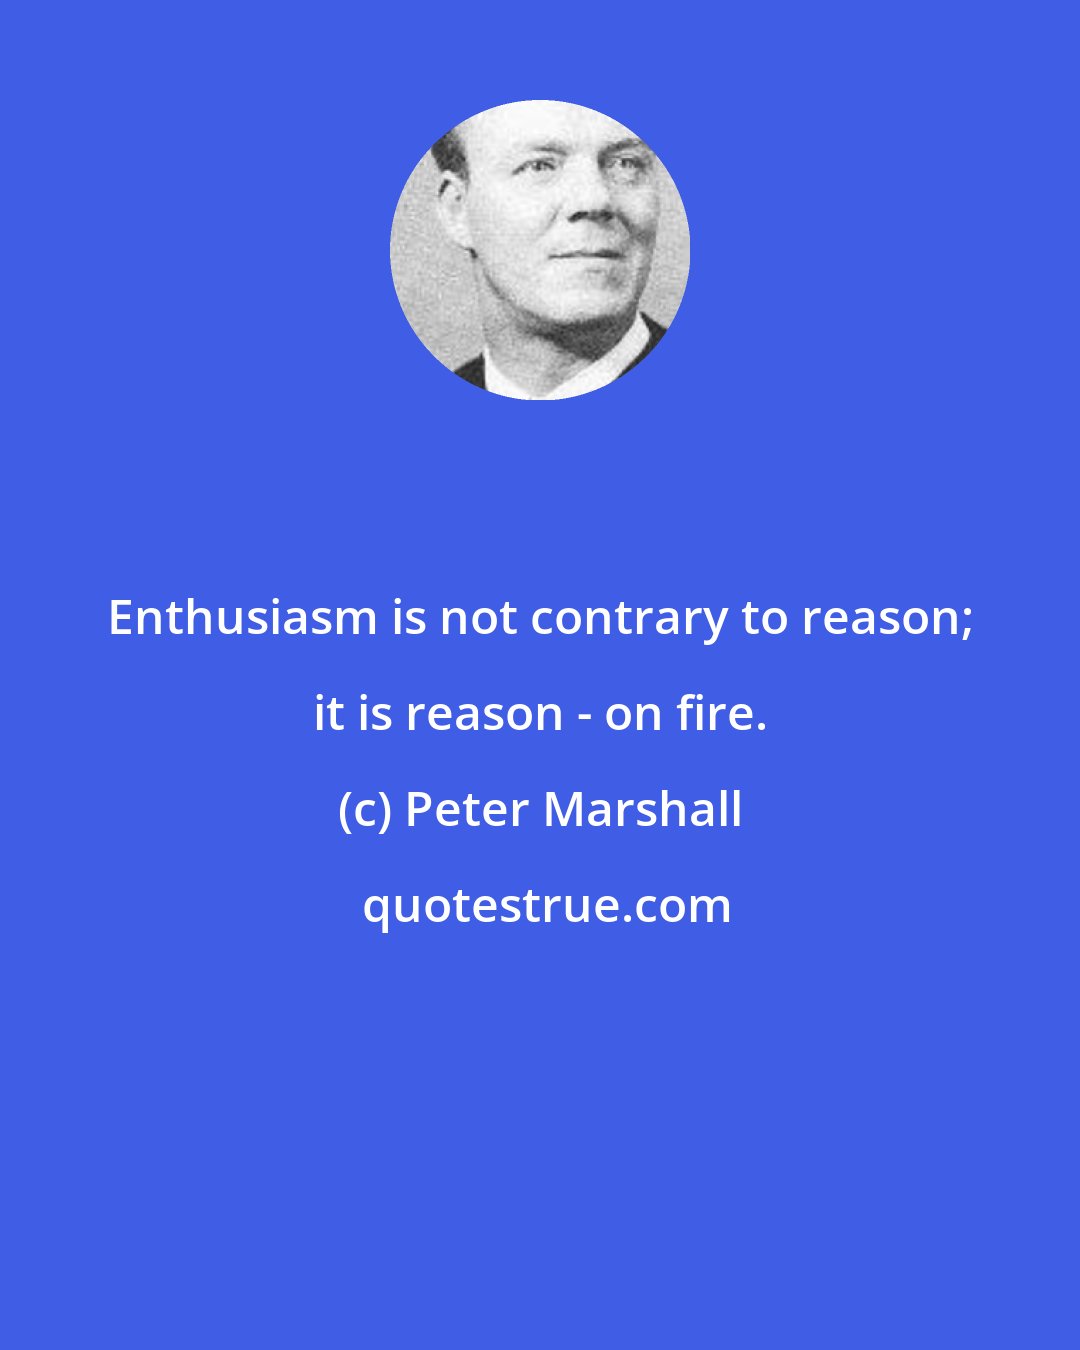 Peter Marshall: Enthusiasm is not contrary to reason; it is reason - on fire.